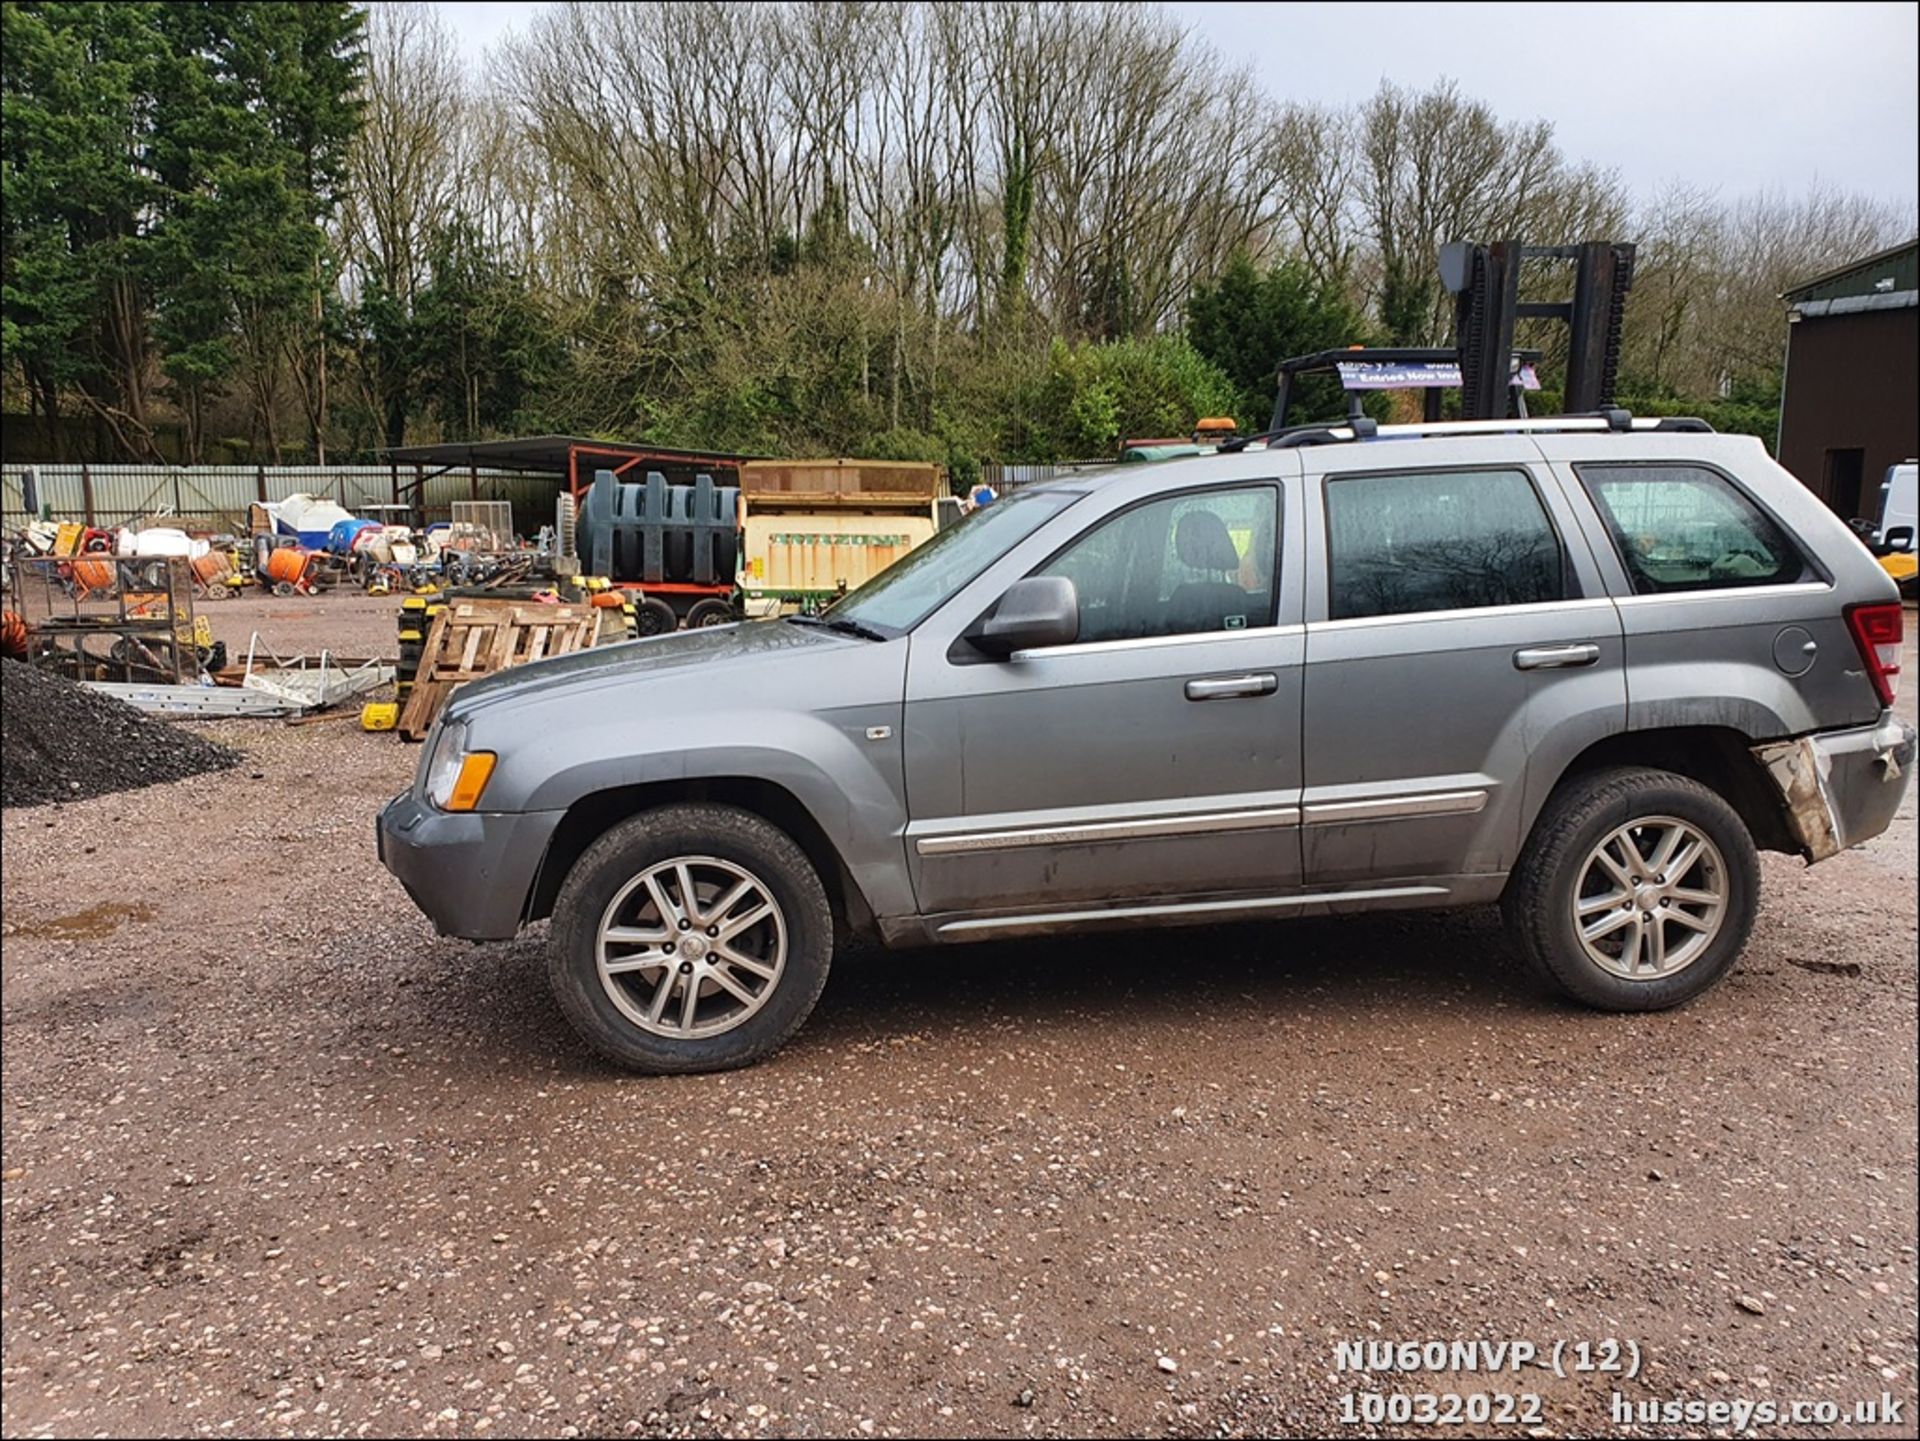 10/60 JEEP G-CHEROKEE OVERLAND CRD A - 2987cc 5dr Estate (Grey, 154k) - Image 12 of 47